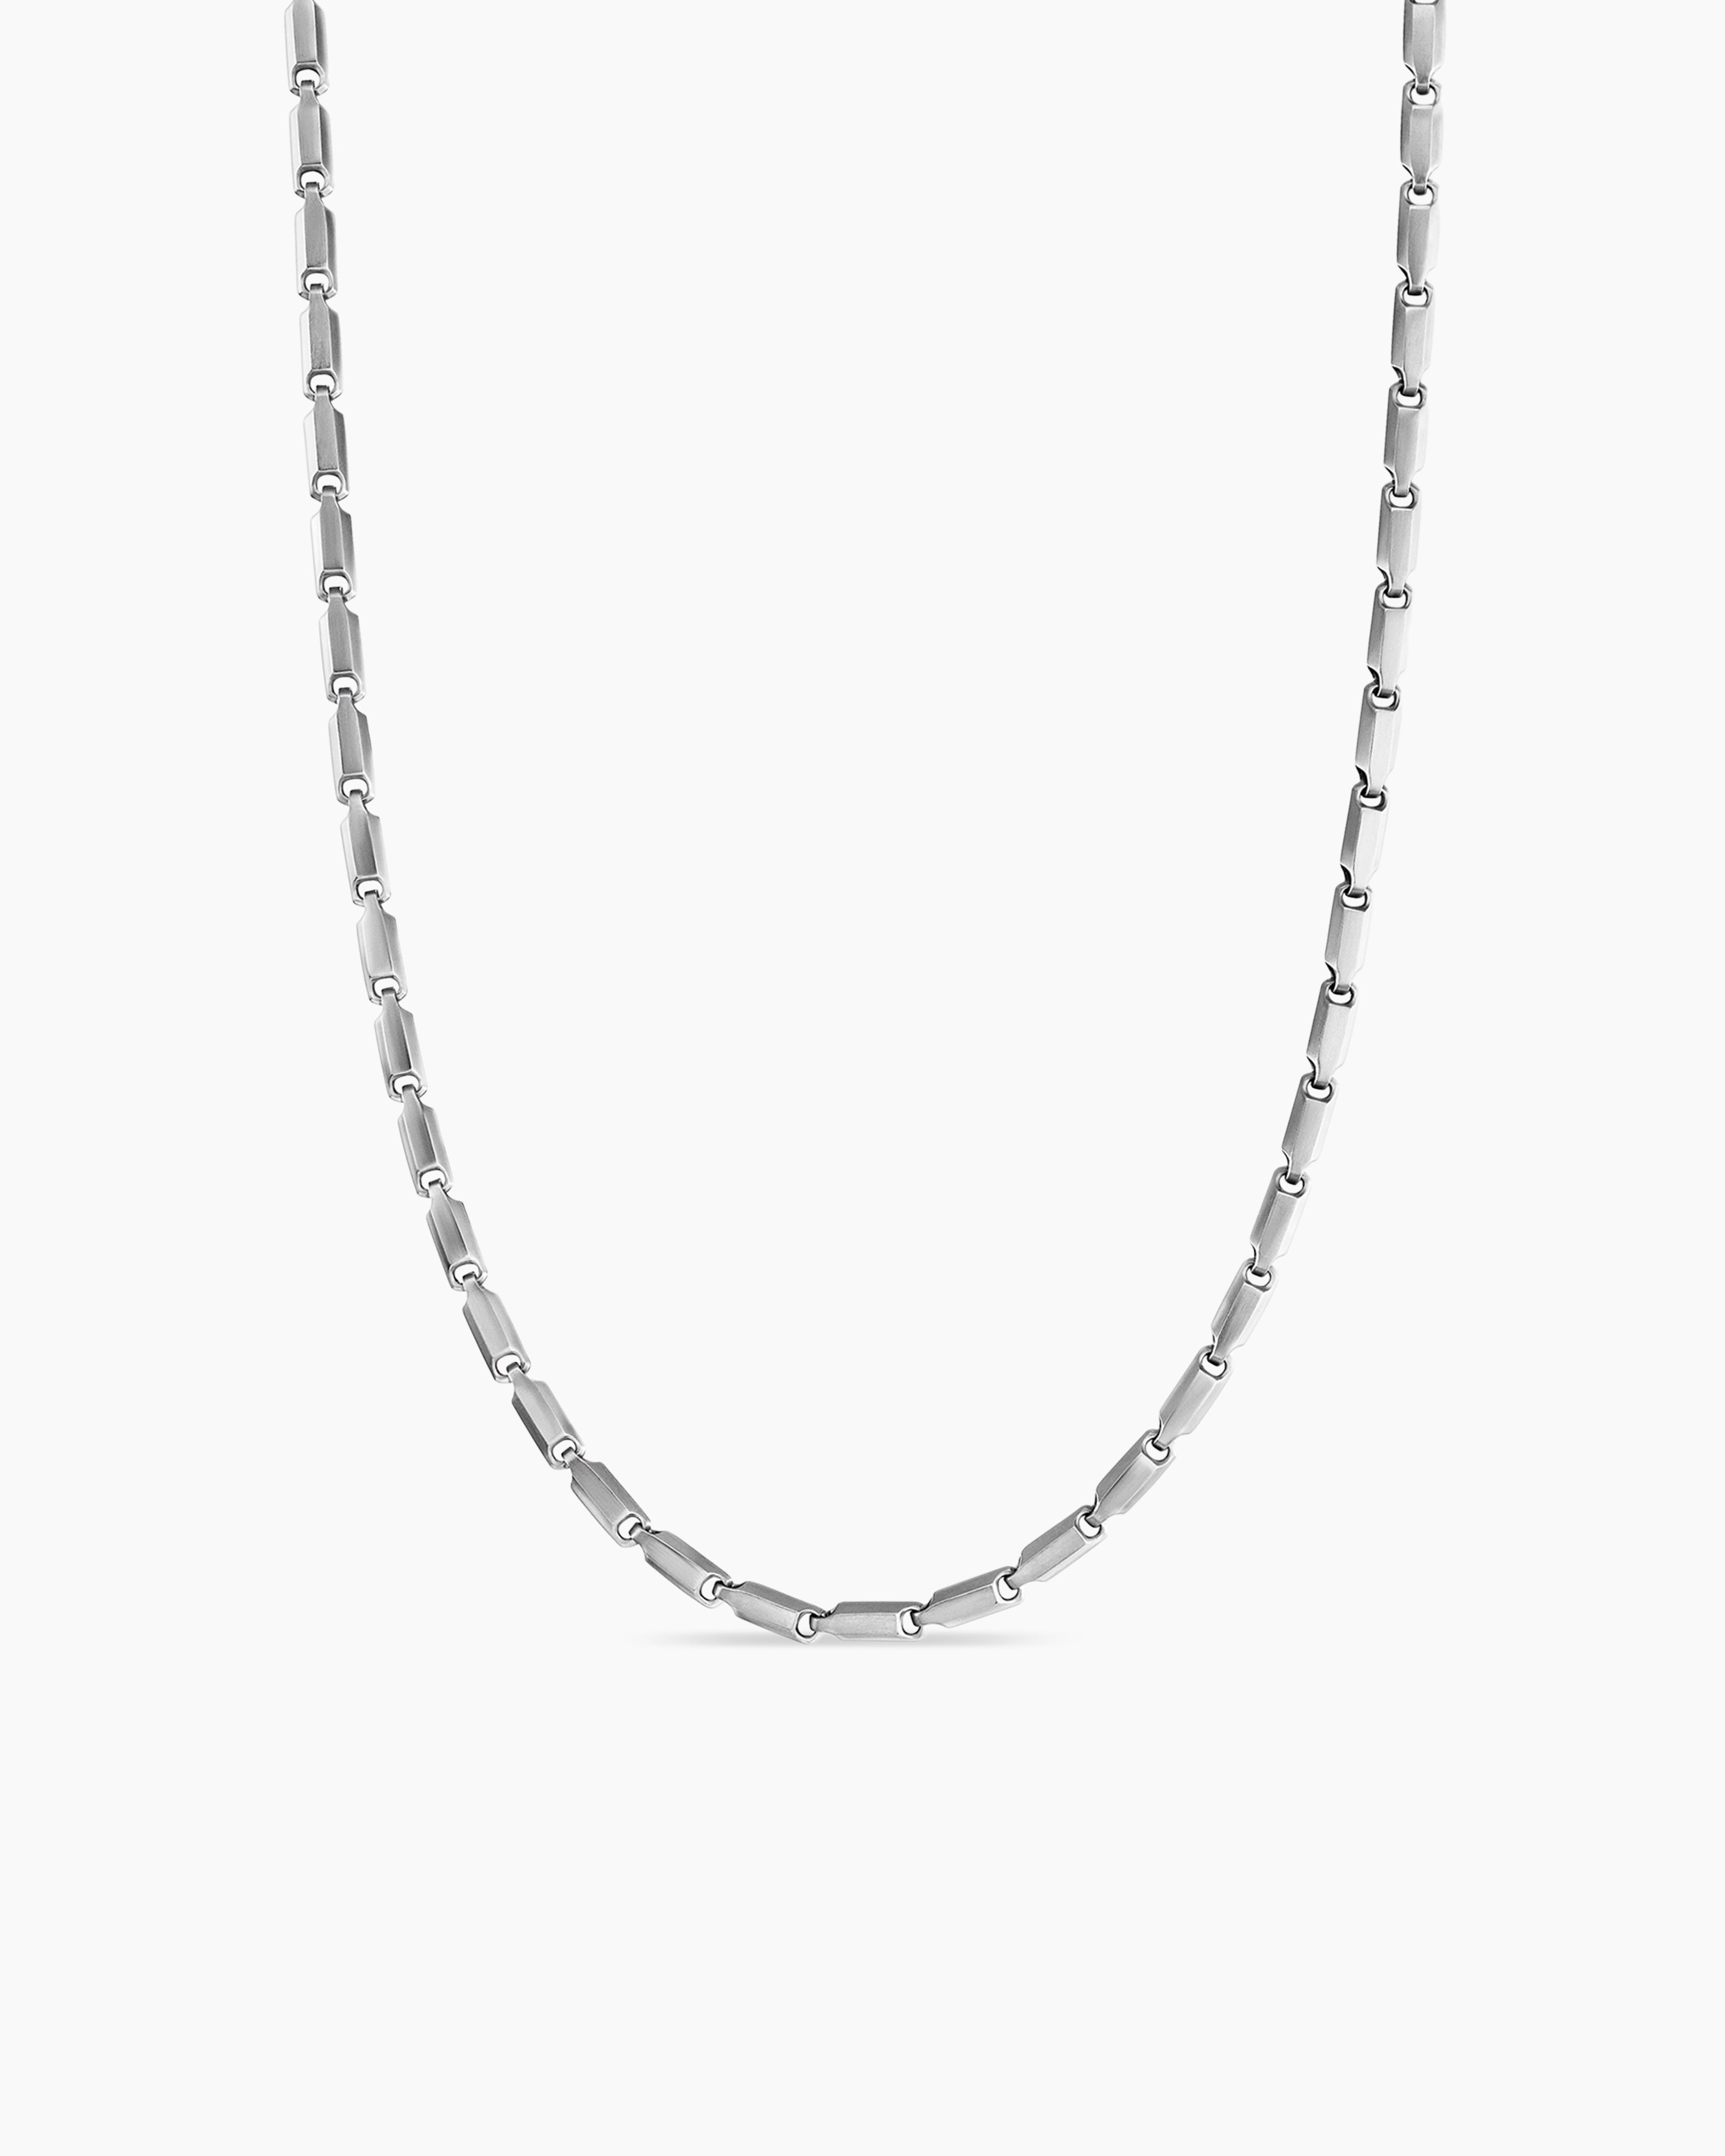 Faceted Link Necklace in Sterling Silver, 3mm